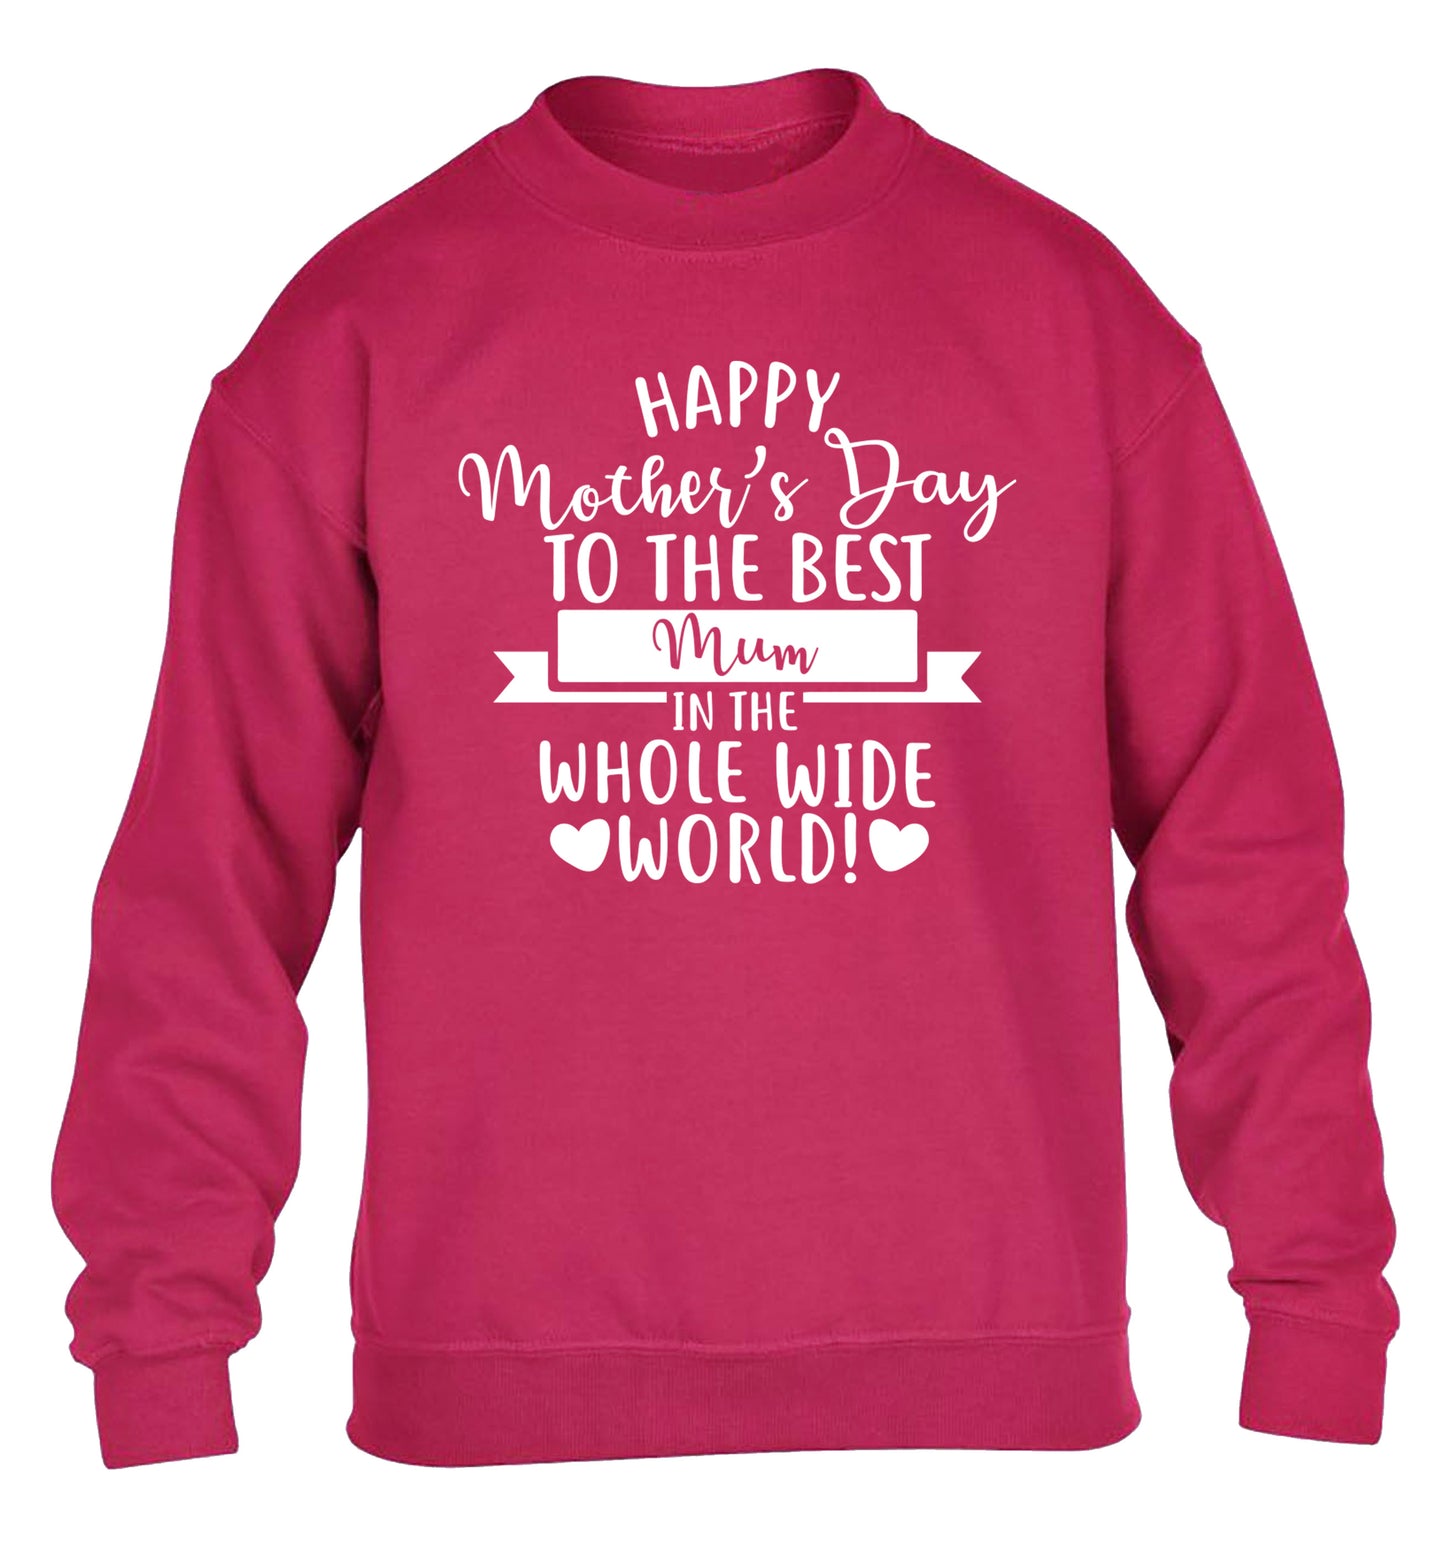 Happy Mother's Day to the best mum in the whole wide world! children's pink sweater 12-13 Years